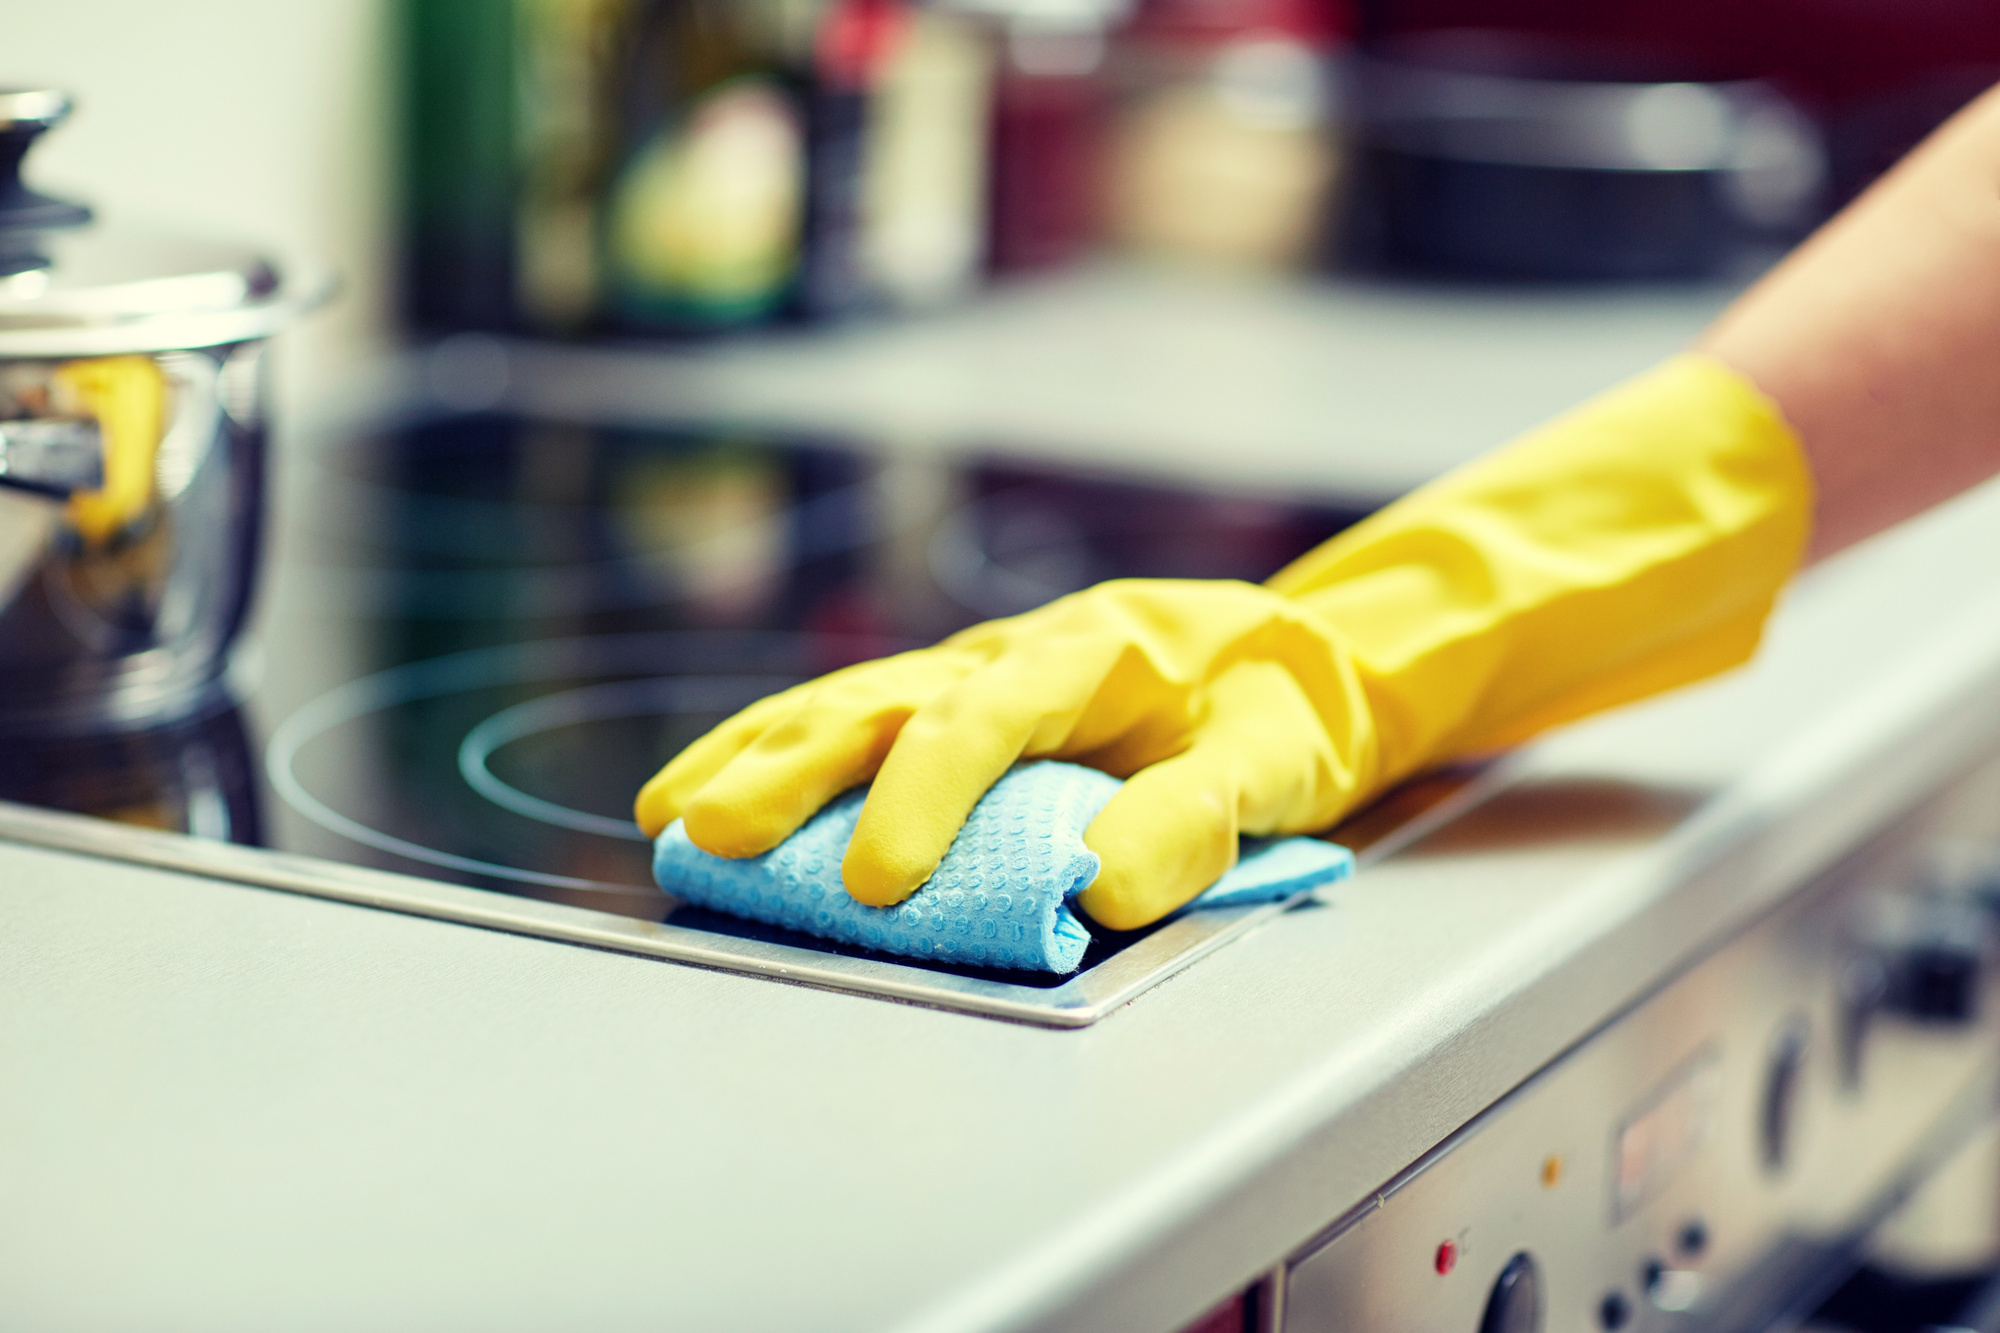 What Should You Do to Keep Your Kitchen Clean?